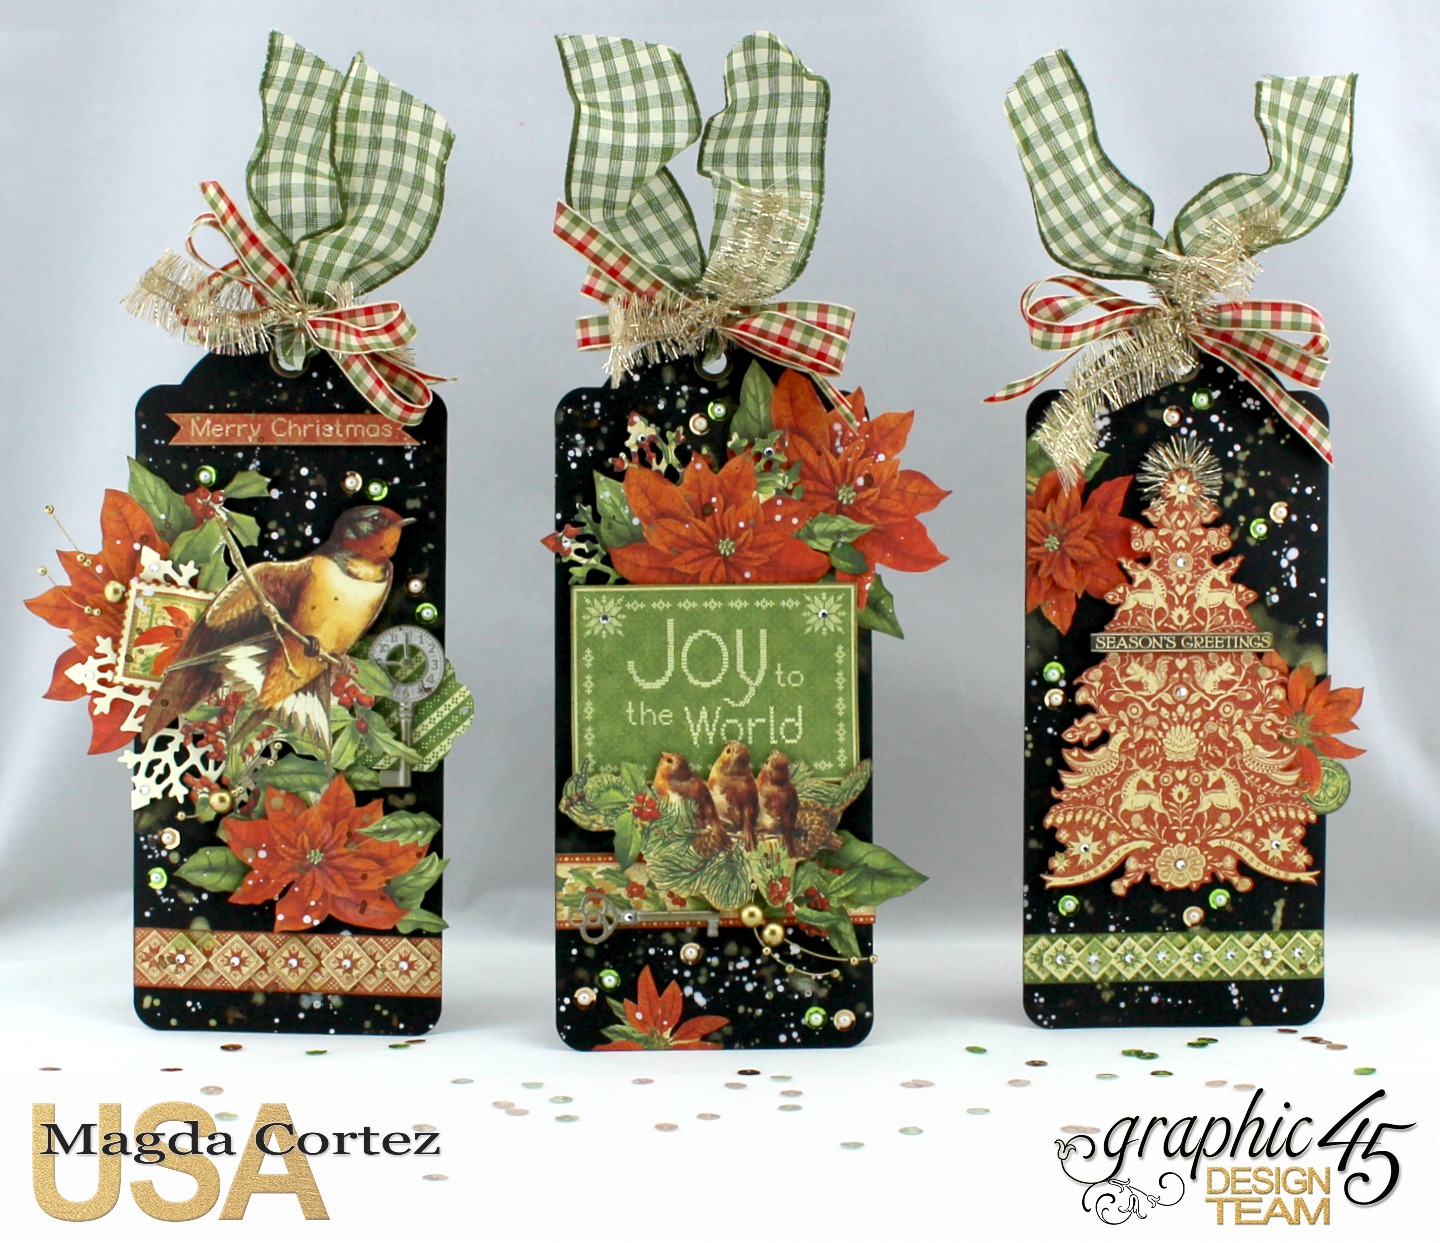 Joy Set of Tags, Winter Wonderland, By Magda Cortez, Product by Graphic 45, Photo 09 of 09.jpg